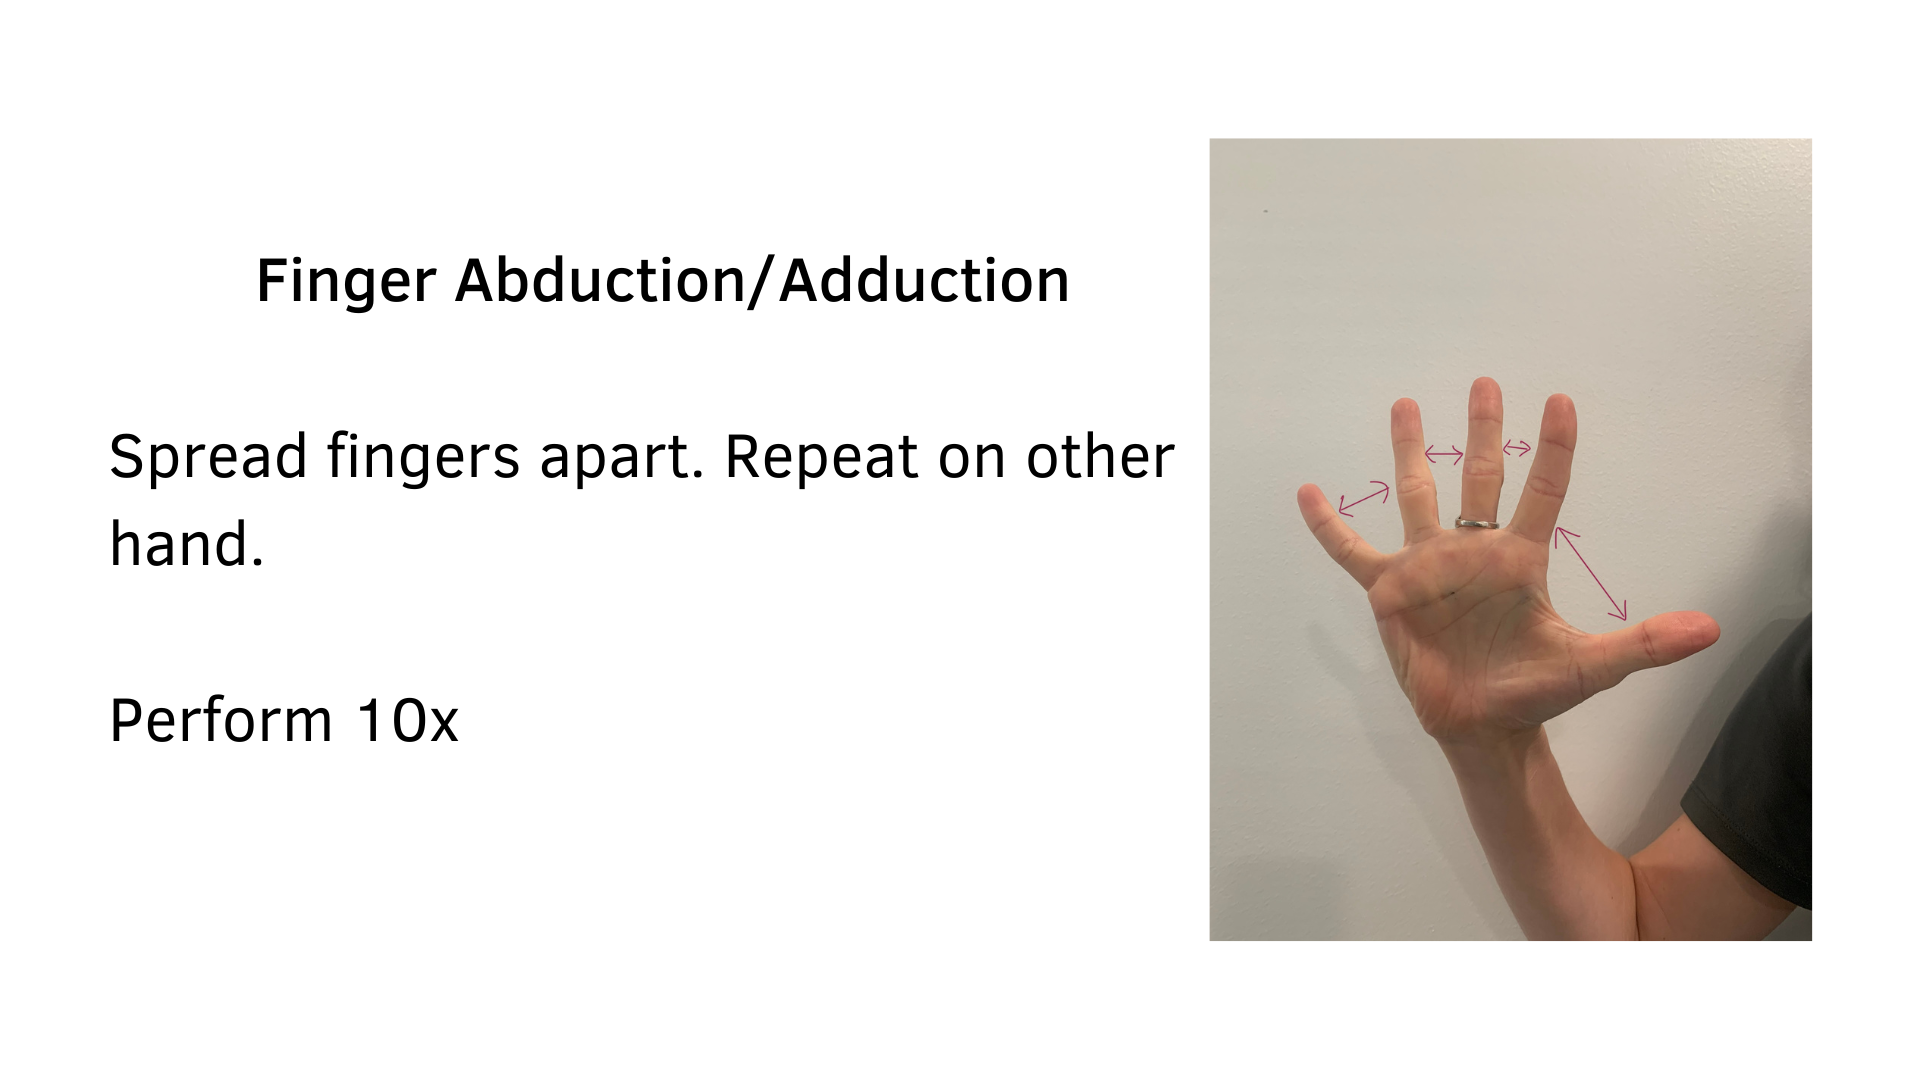 Black text on a white background that reads, "Finger Abduction/Adduction: Spread fingers apart. Repeat on other hand. Perform 10x". A picture of a hand with fingers spread wide and arrows between the fingers are shown to demonstrate the stretch.